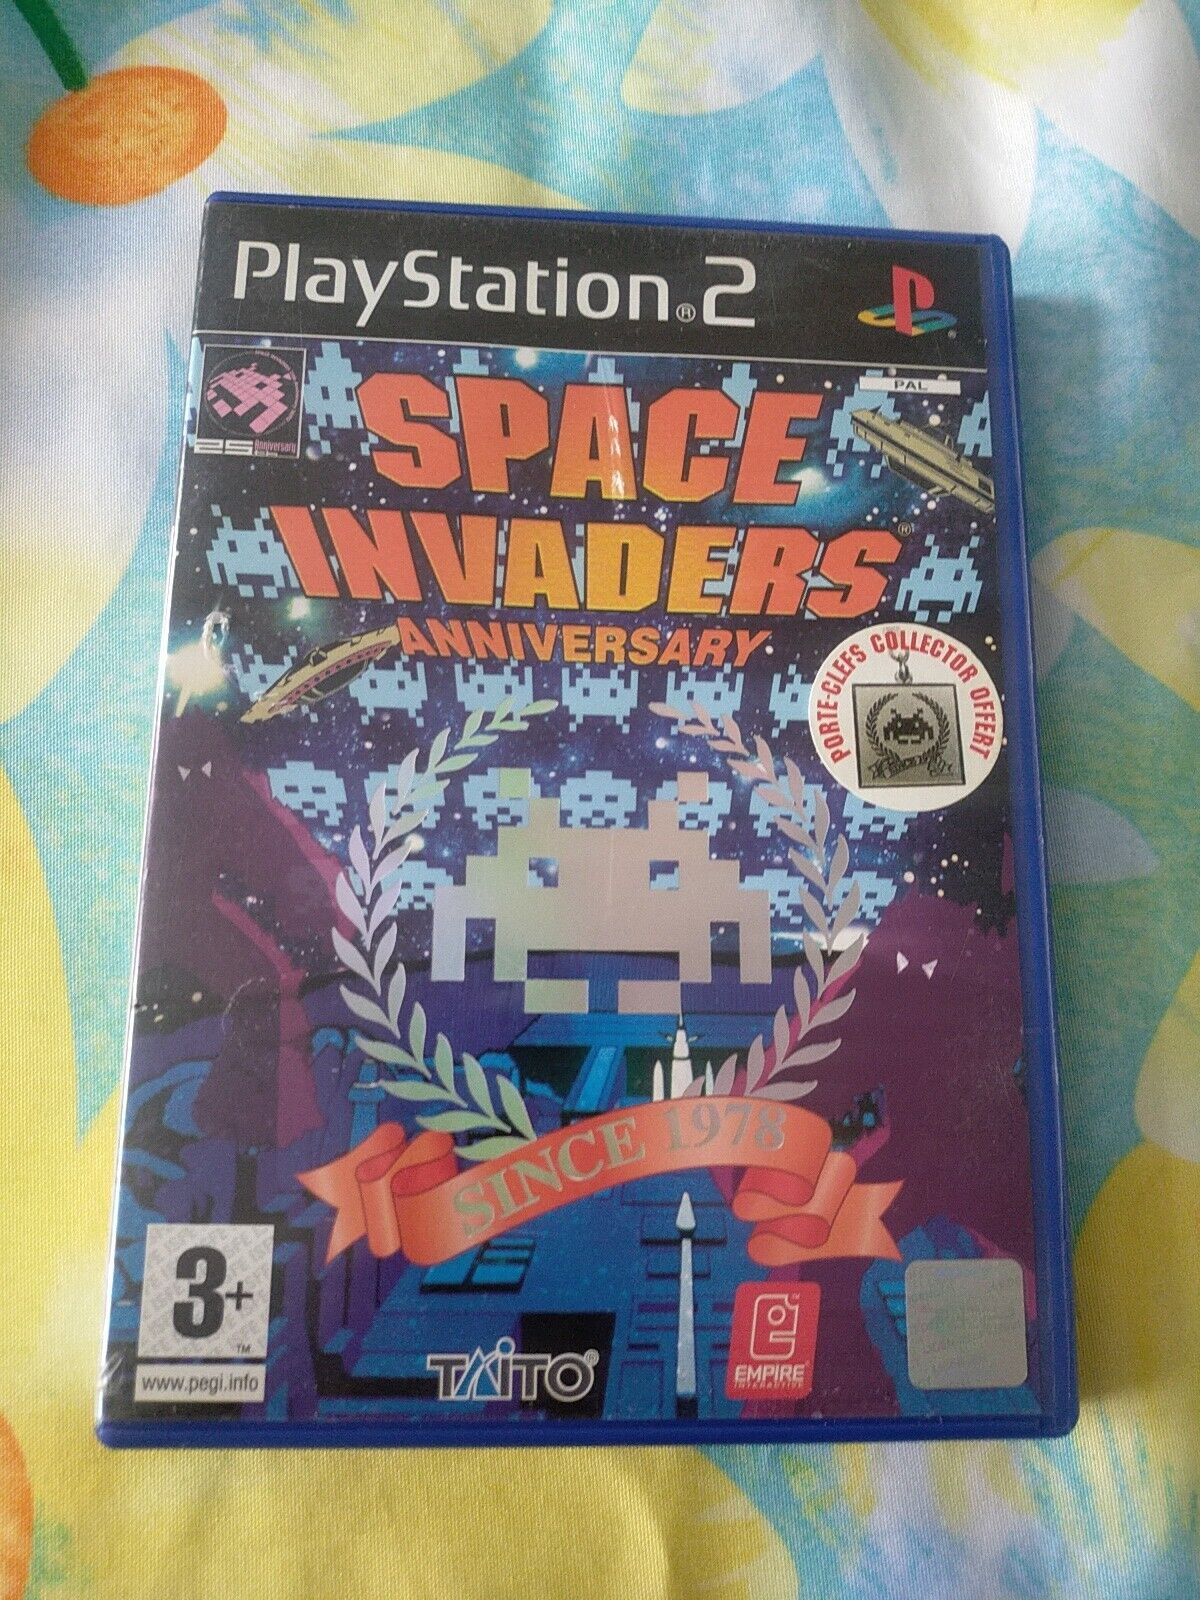 Space invaders anniversary, PS2, complet